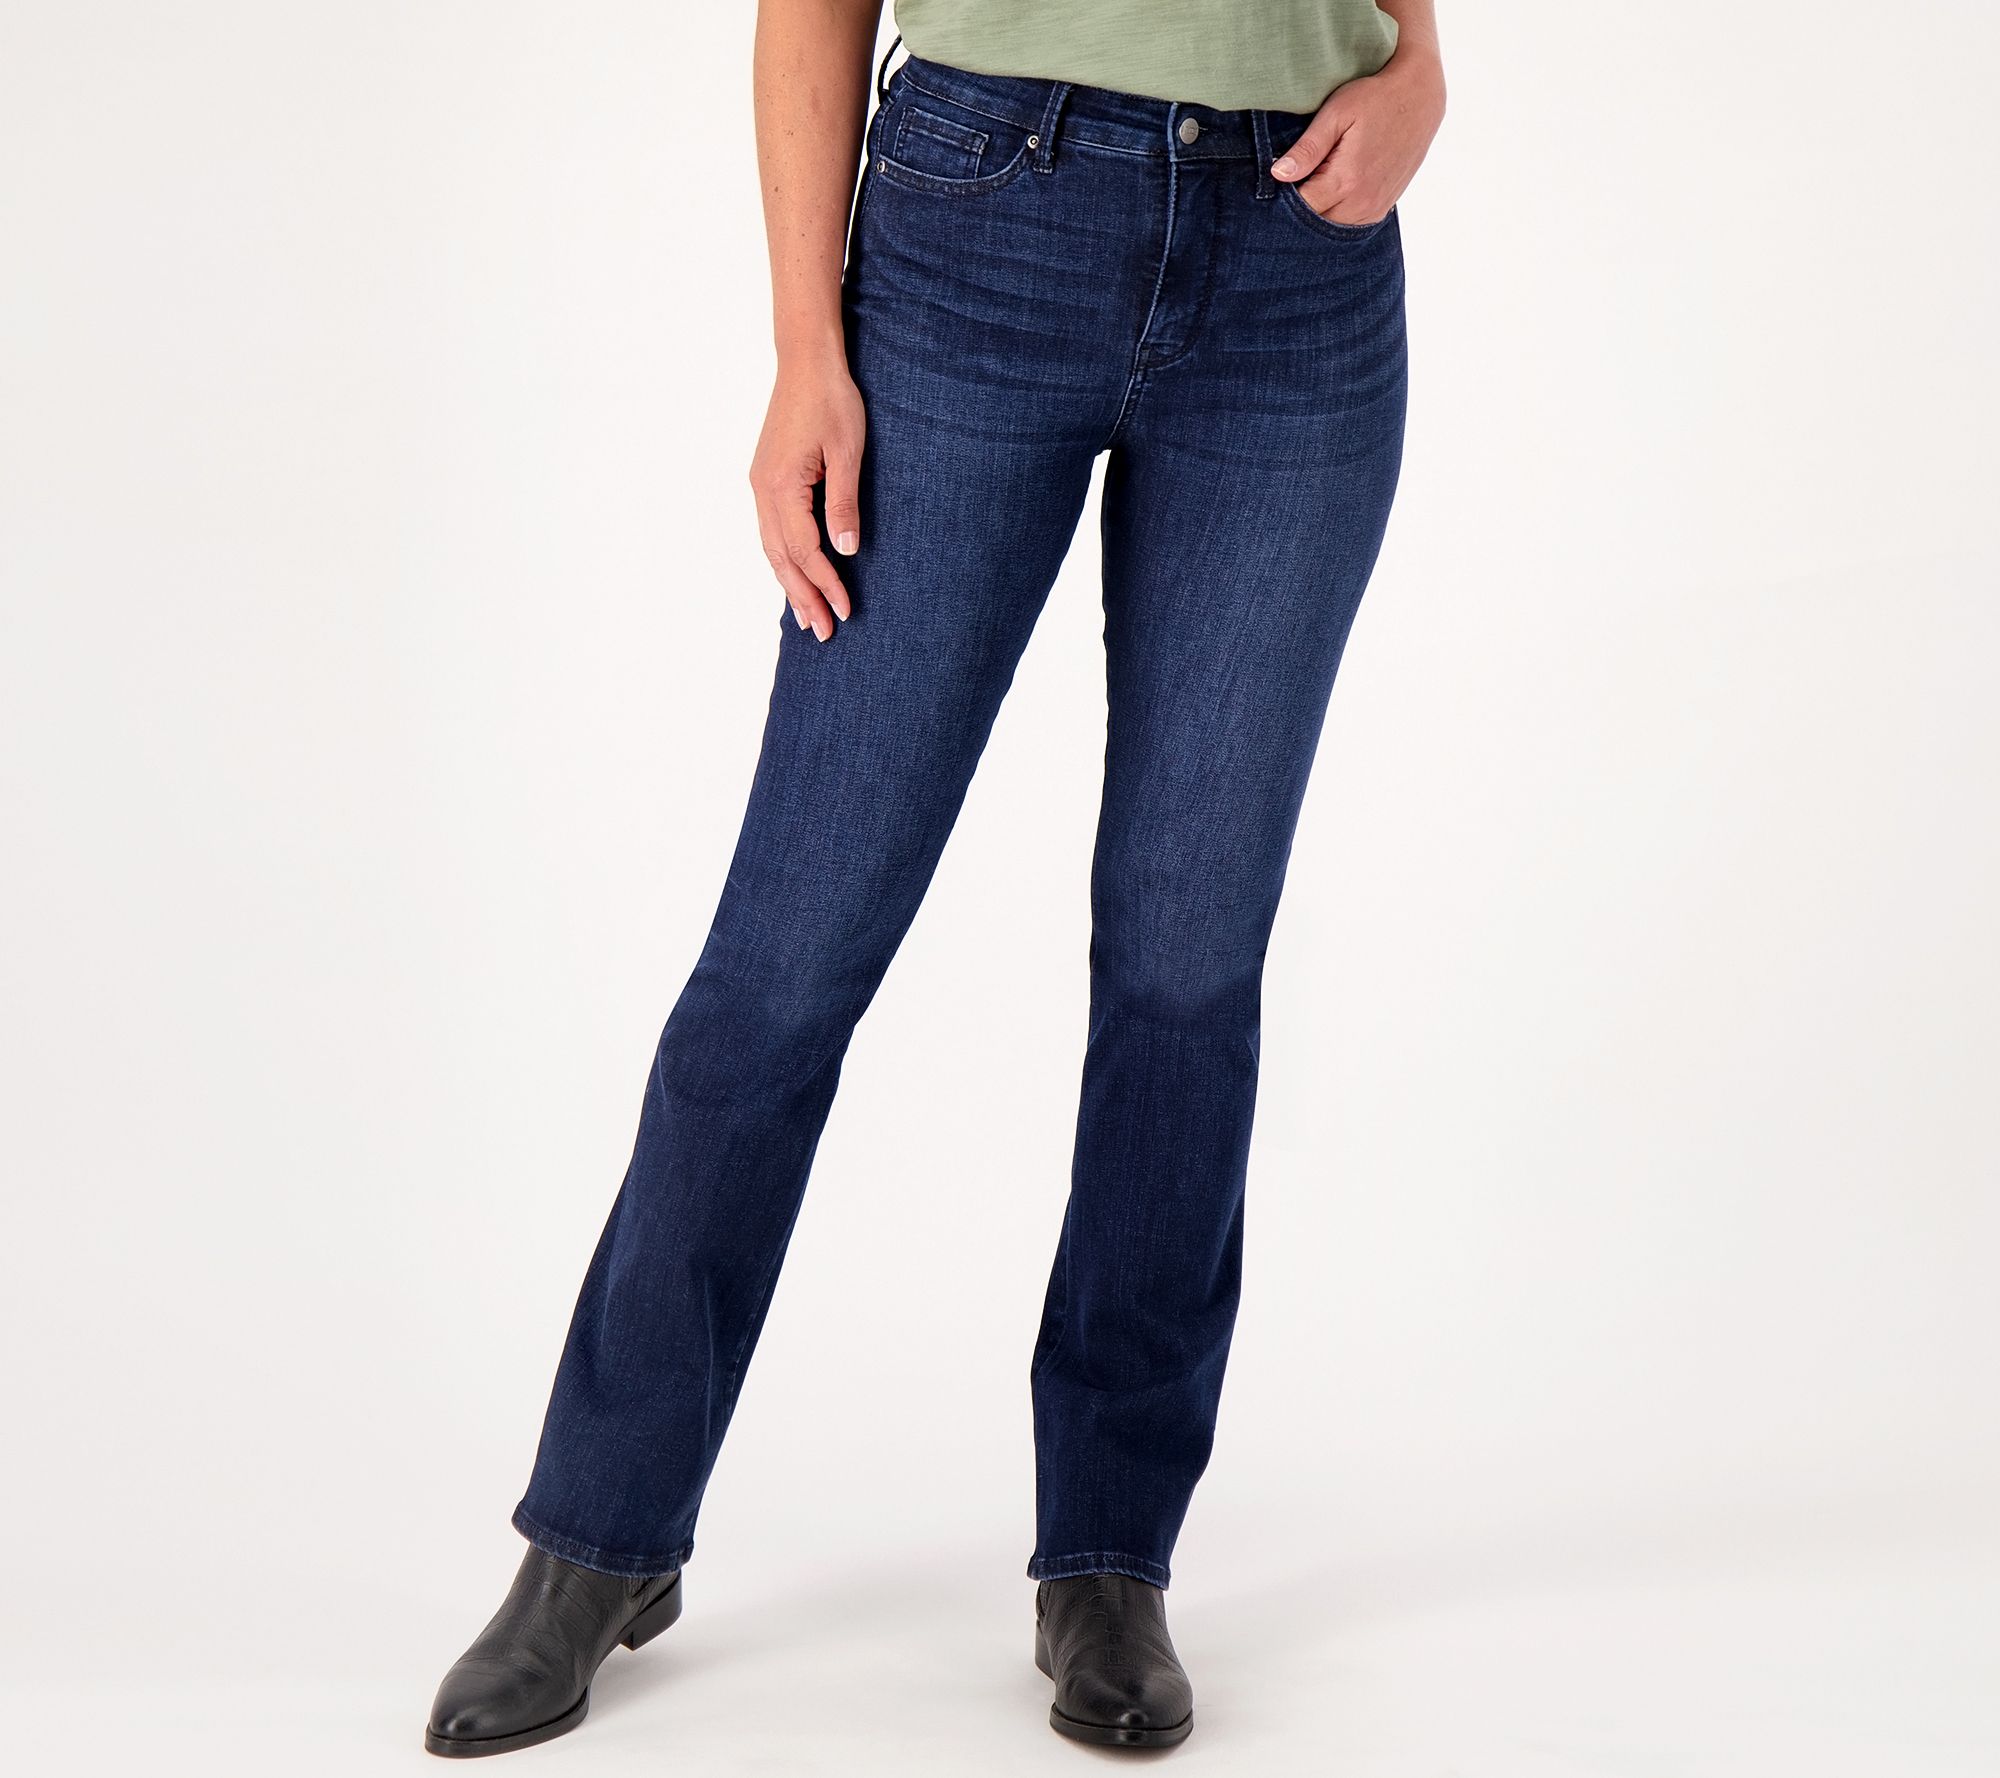 Slim Butt Lift Shaping Jeans Perfect Hip To Body Ratio Skinny